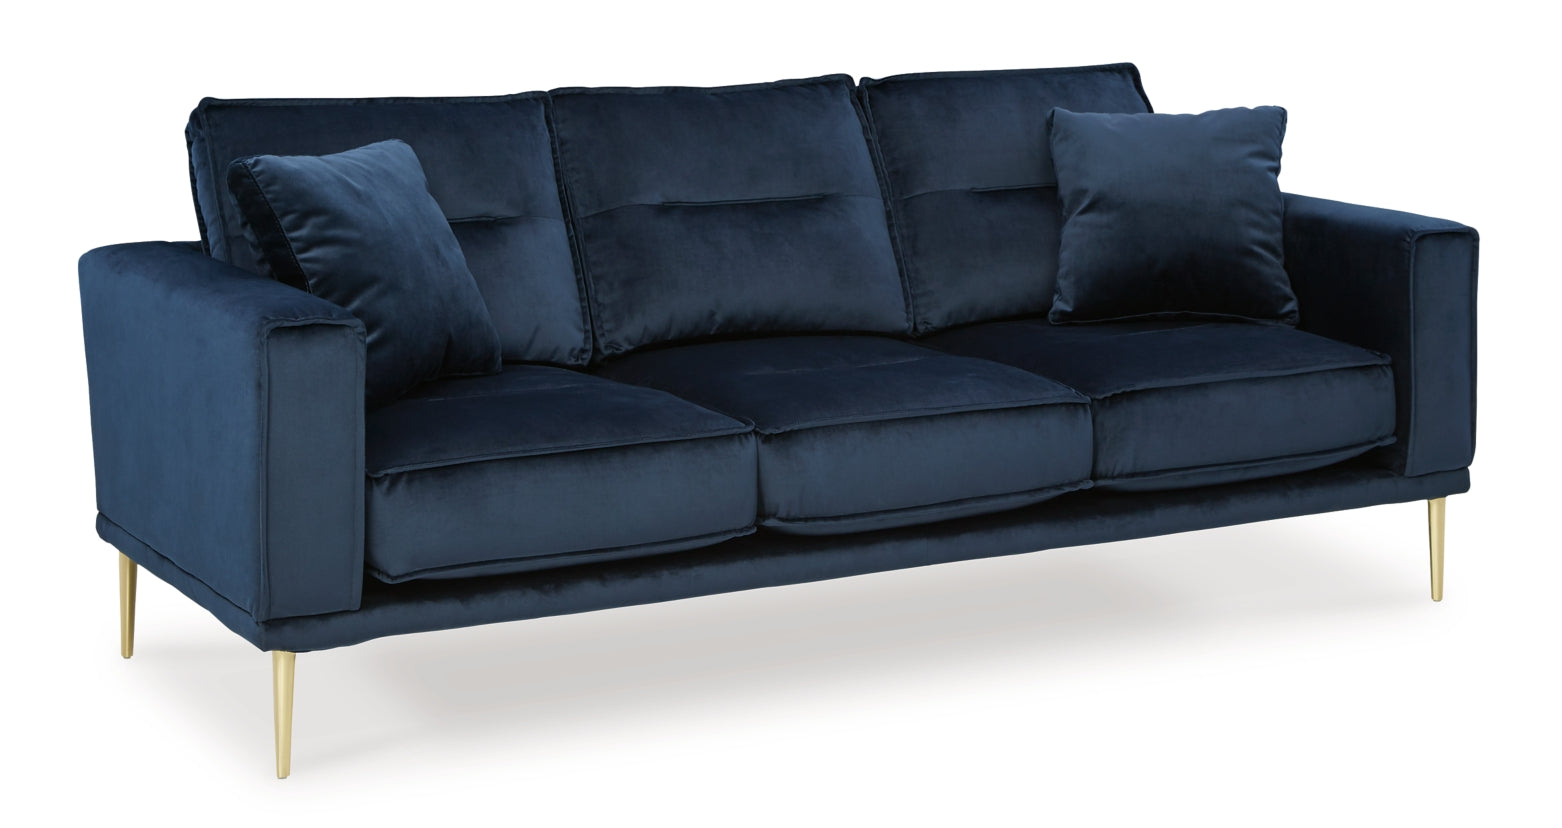 Macleary Sofa and Loveseat - furniture place usa